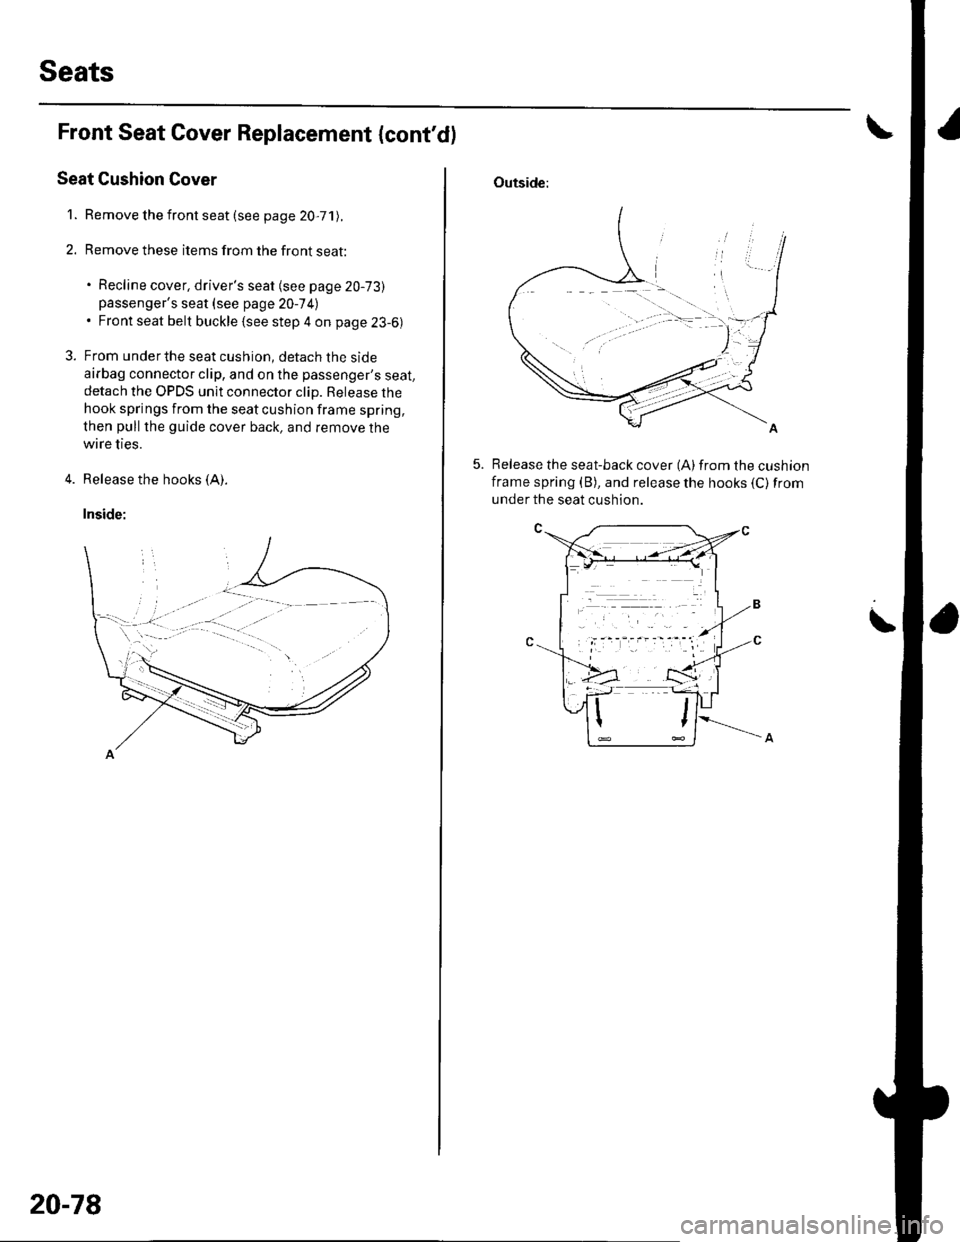 HONDA CIVIC 2003 7.G Workshop Manual Seats
Front Seat Cover Replacement {contd)
Seat Cushion Cover
1. Remove the front seat (see page 20,71).
2. Remove these items from the front seat:
. Recline cover, drivers seat (see page 20-73)pass